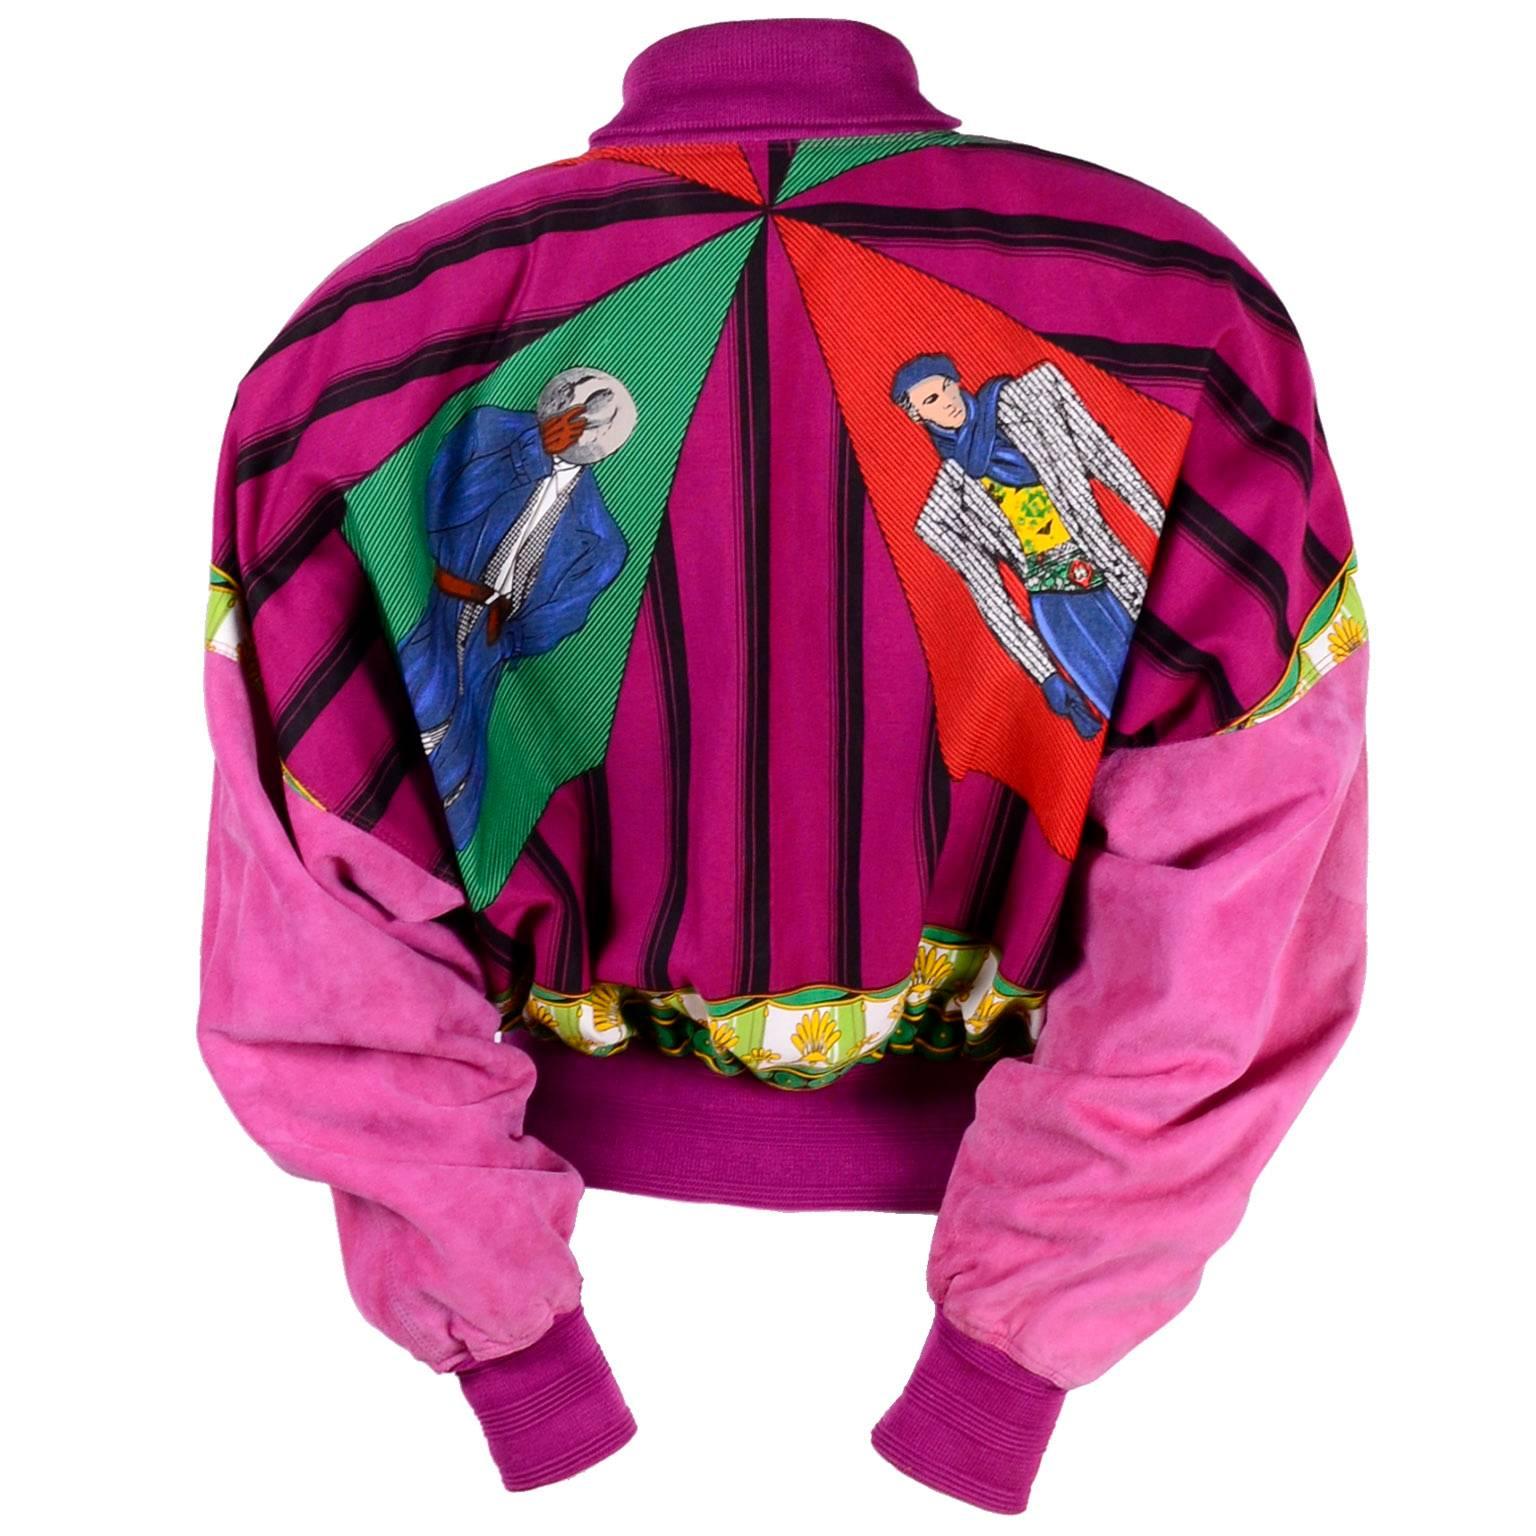 Gianni Versace Pink Suede and Reversible Silk Novelty Print Jacket, 1980s